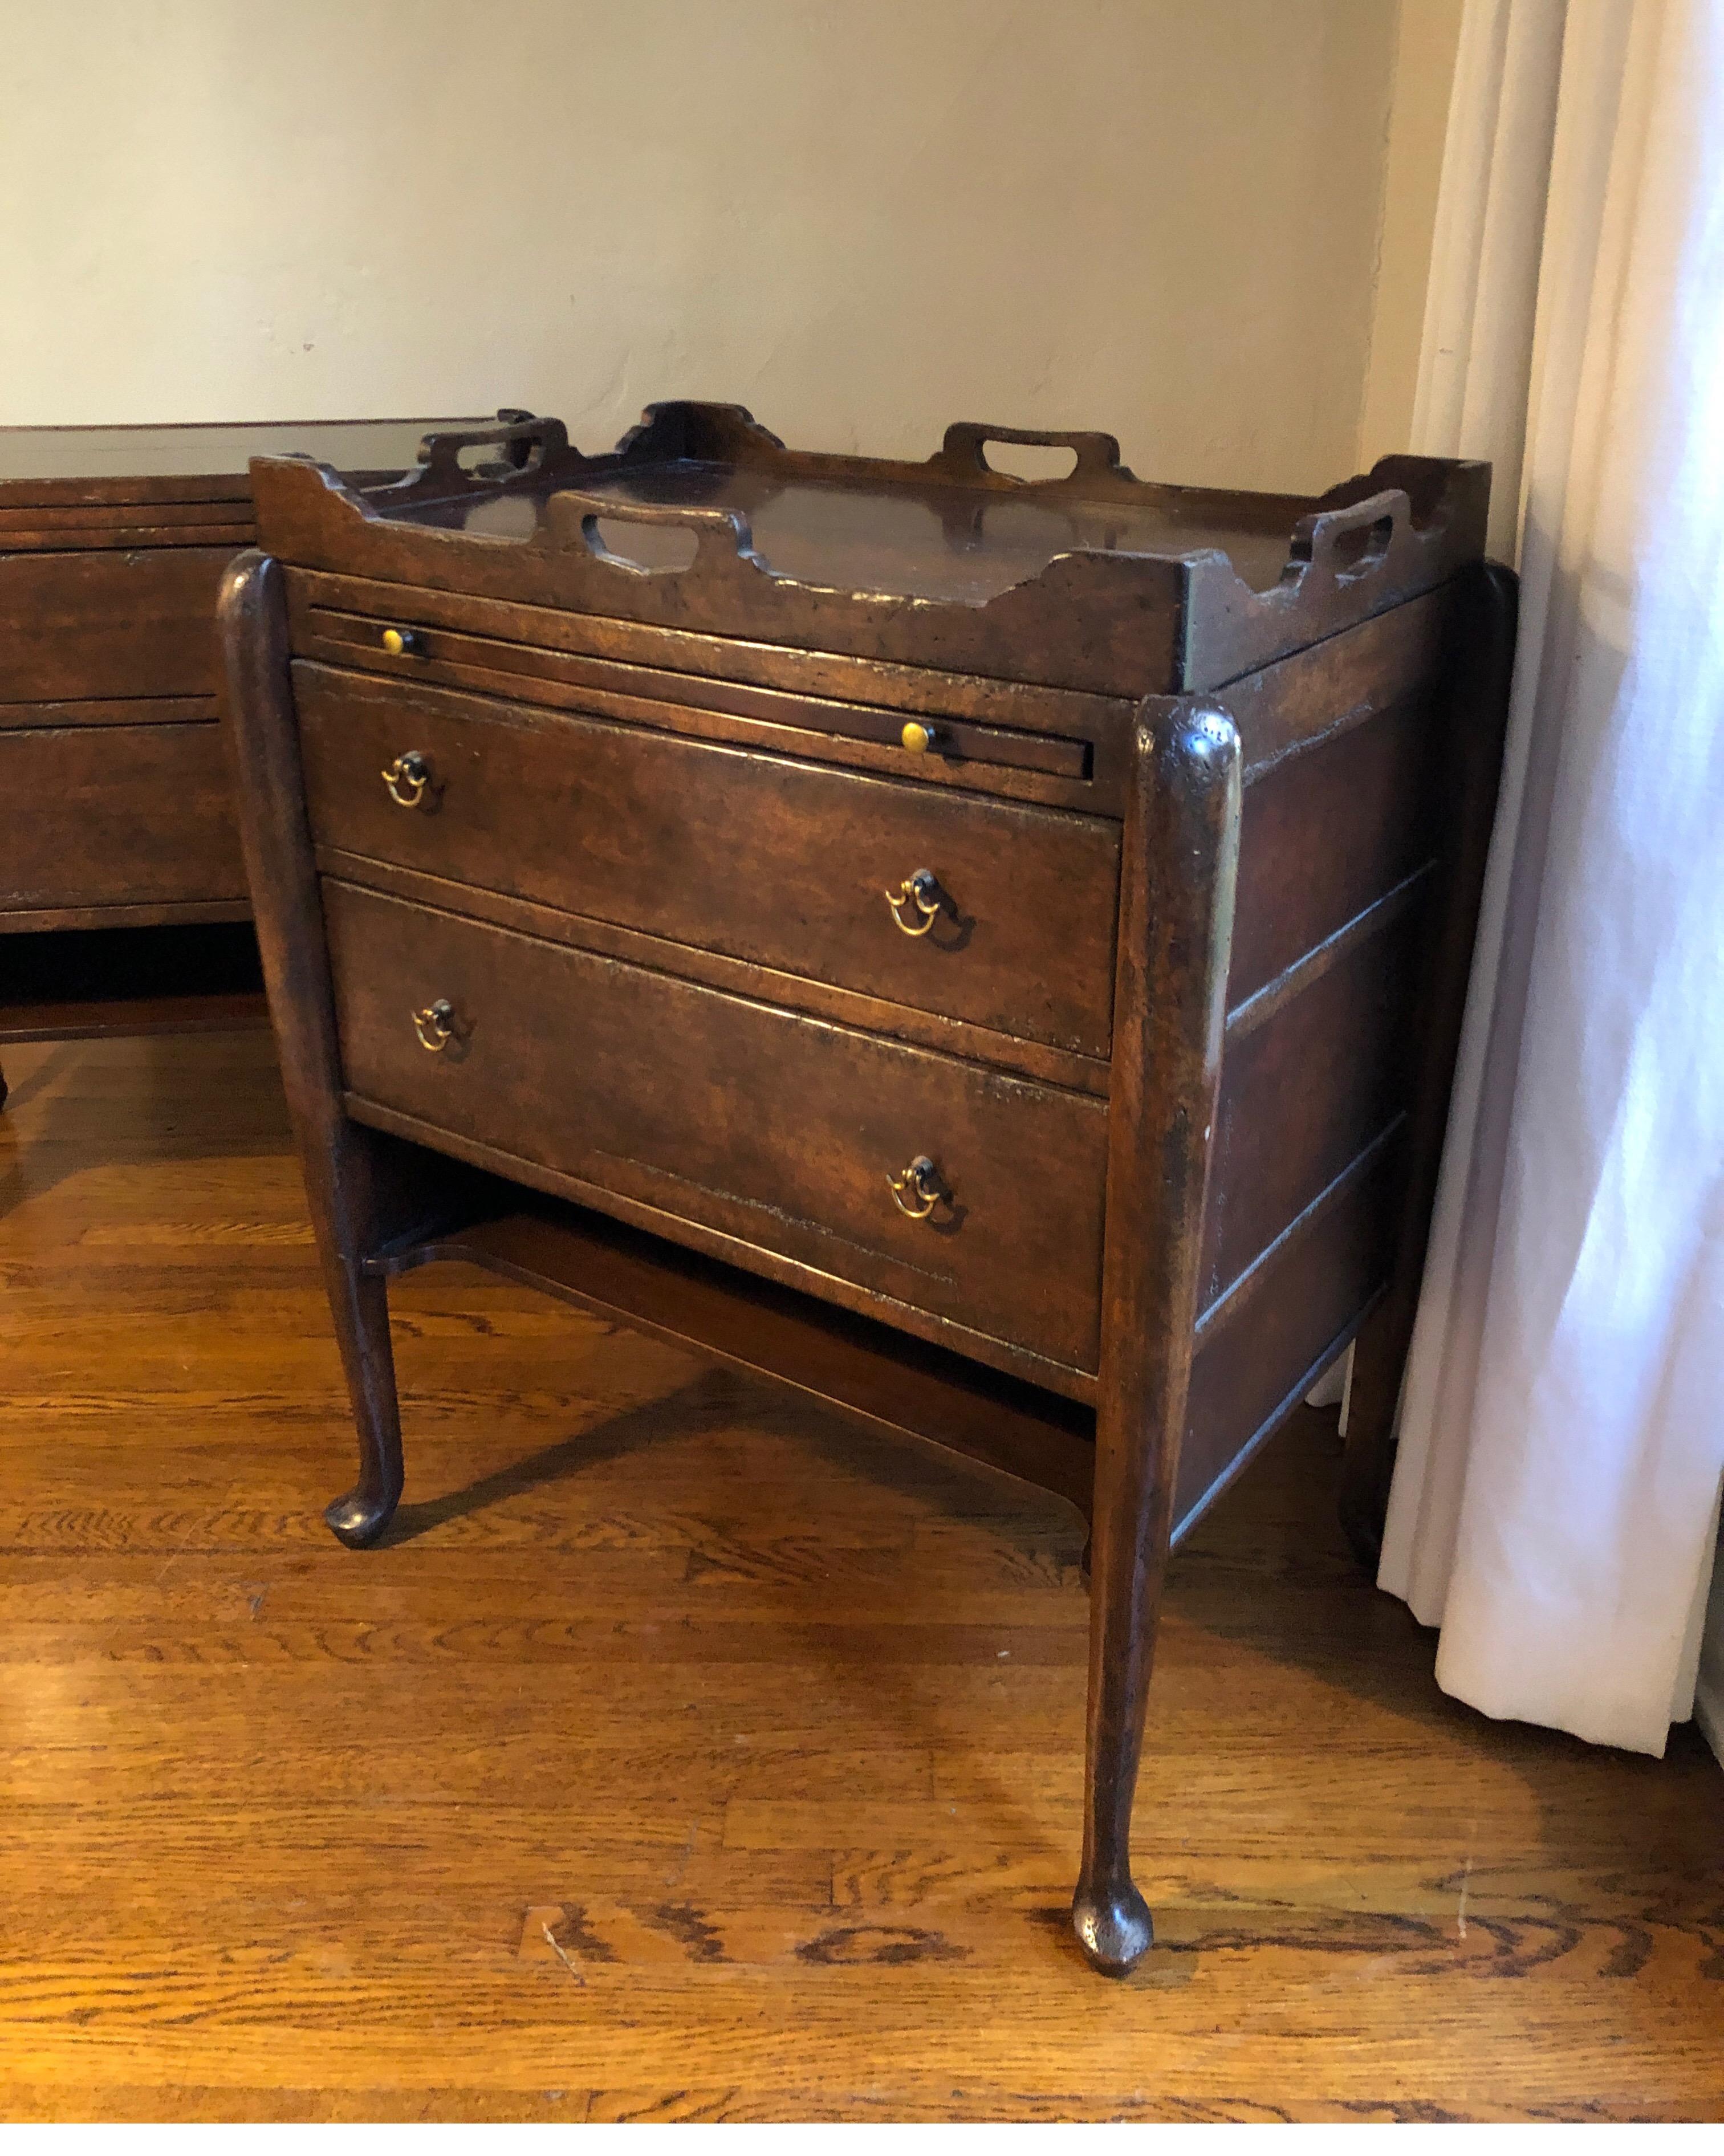 A fine pair of Georgian style walnut tray (removable) top commodes, or bedside/night tables. Pull out valet table in each with brass hardware.
Removable top makes them transitional for a more clean/modern style.
Drawers open and close smooth and